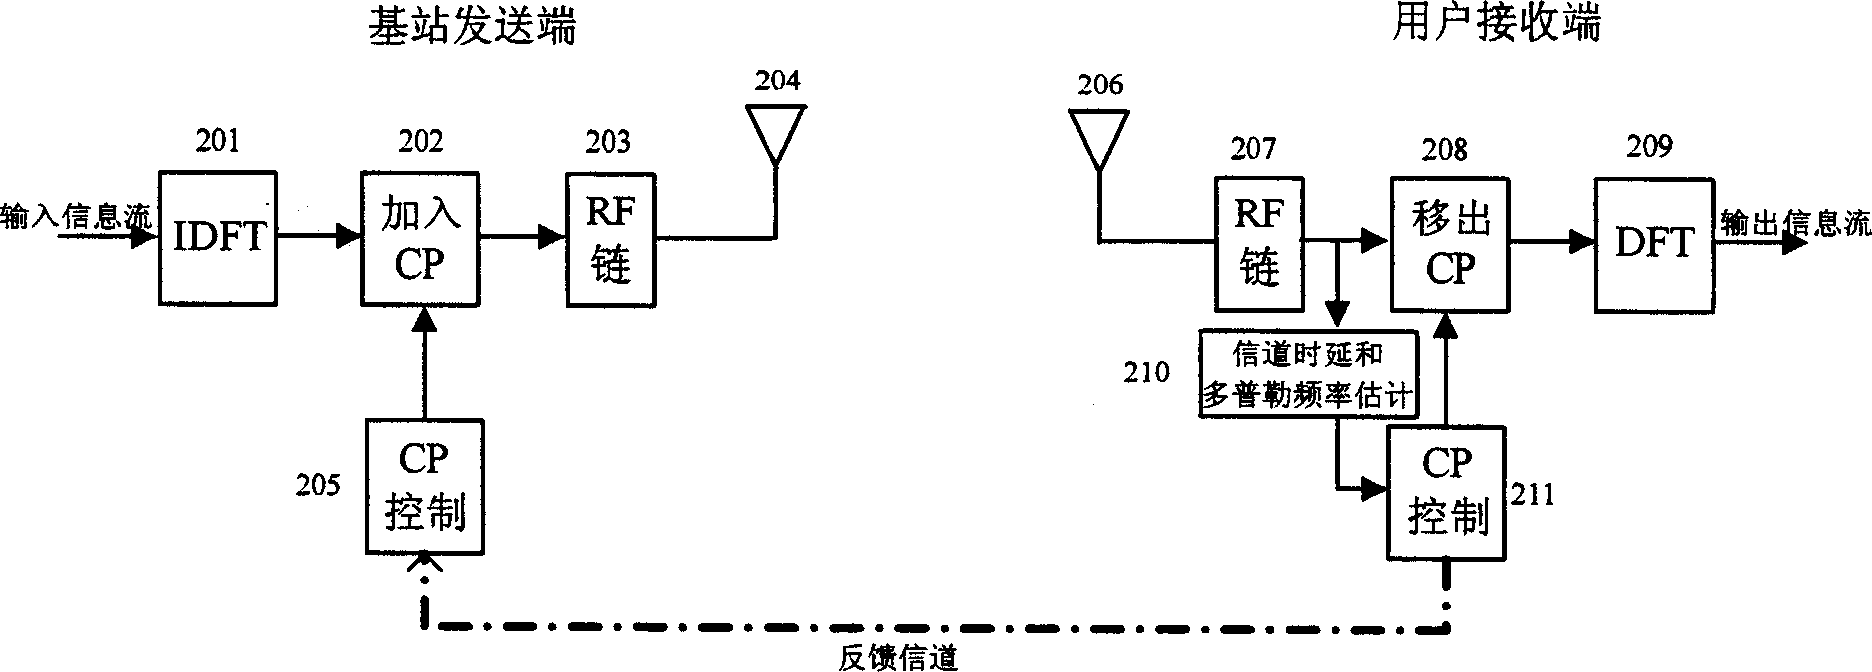 Reconstructional OFDM system and its operation method for transmitting and receiving